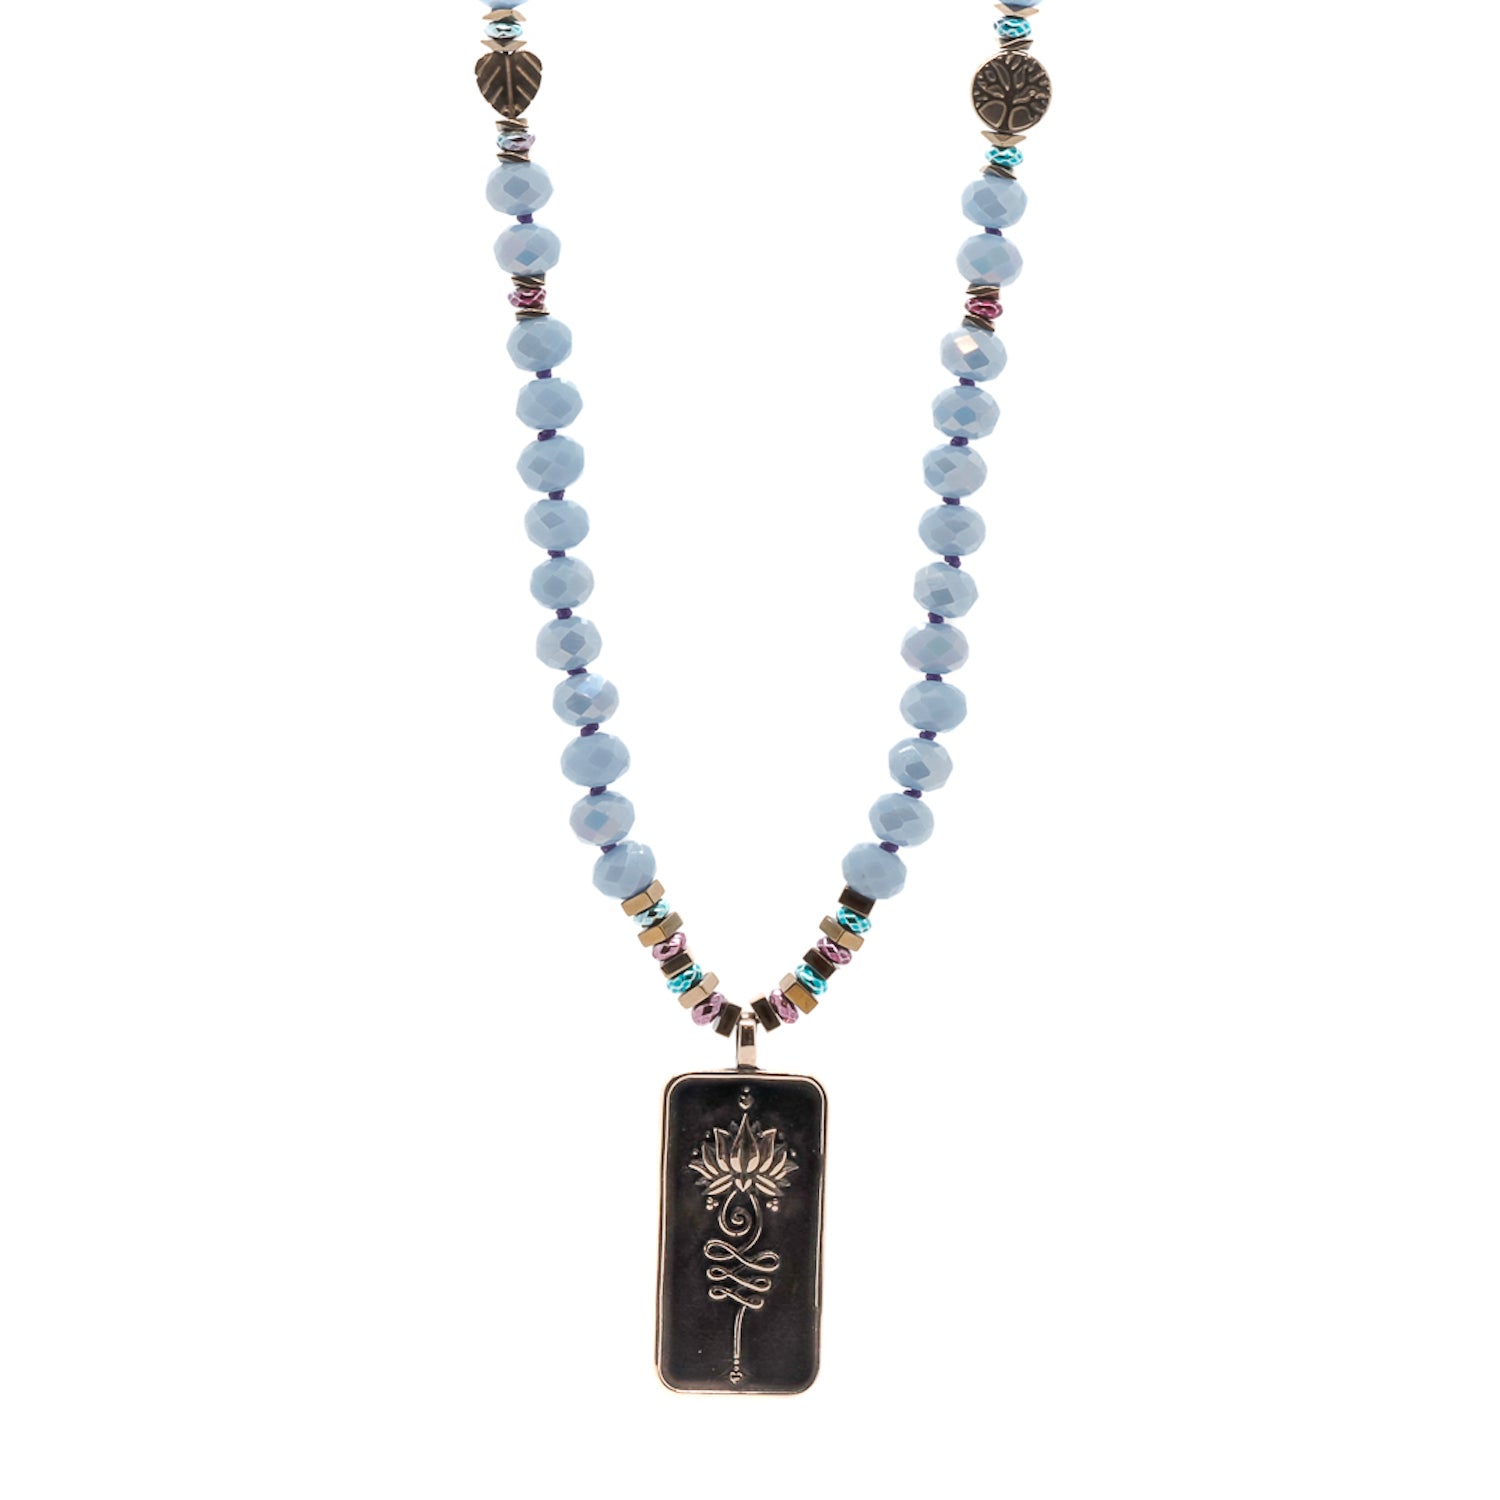 Unalome Self Love Necklace - Handcrafted with Unique Pendant and Blue Crystal Beads.